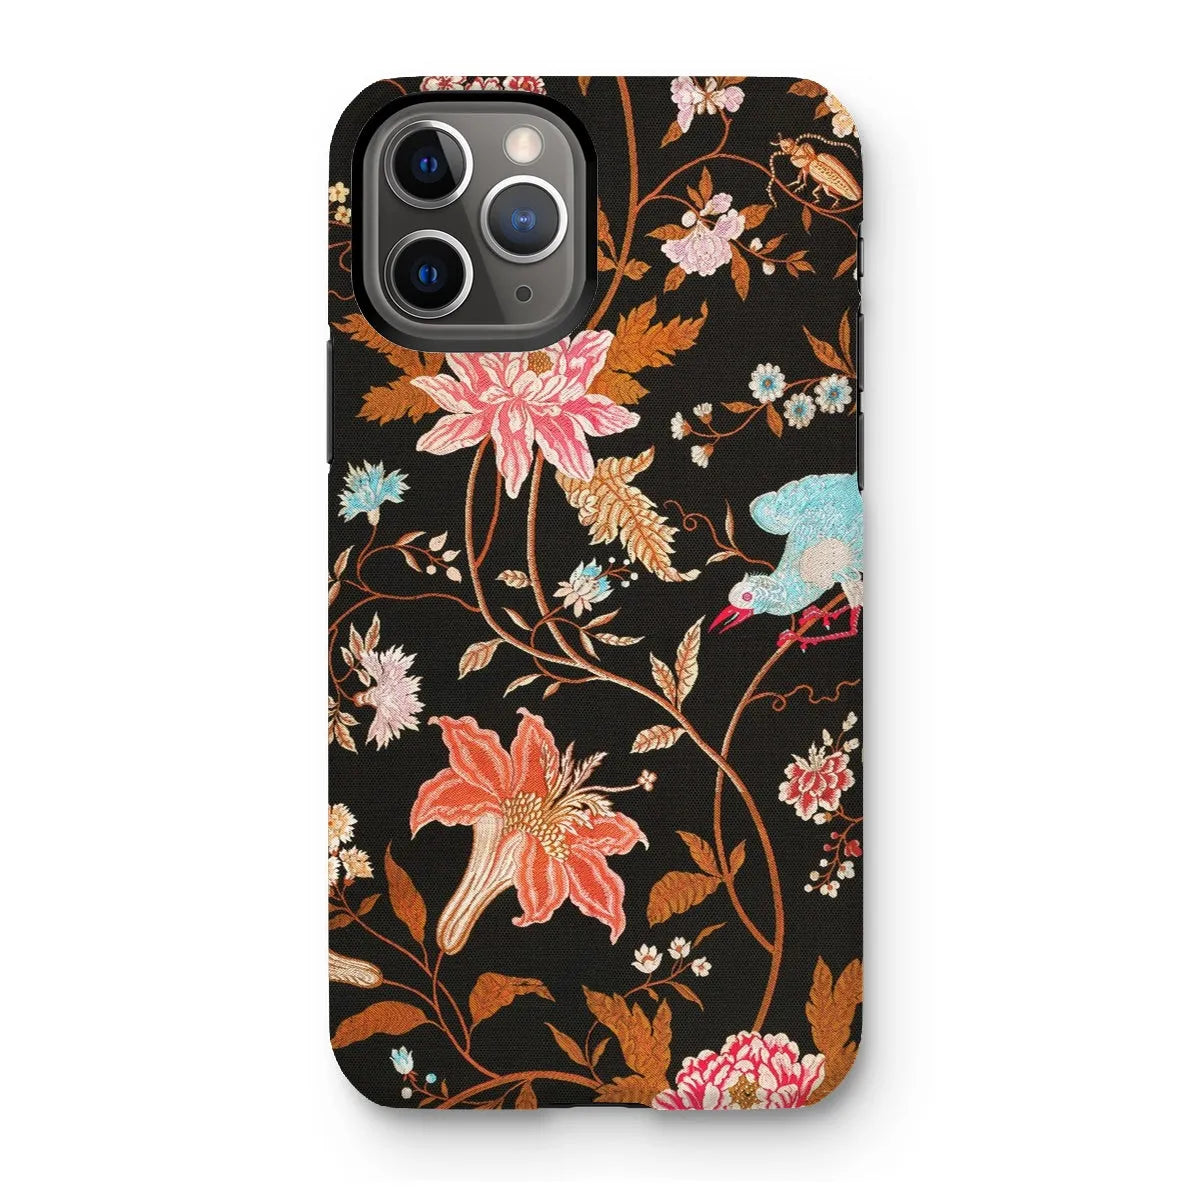 Midnight Call - Indian Aesthetic Fabric Art Phone Case - Iphone 11 Pro / Matte - Mobile Phone Cases - Aesthetic Art